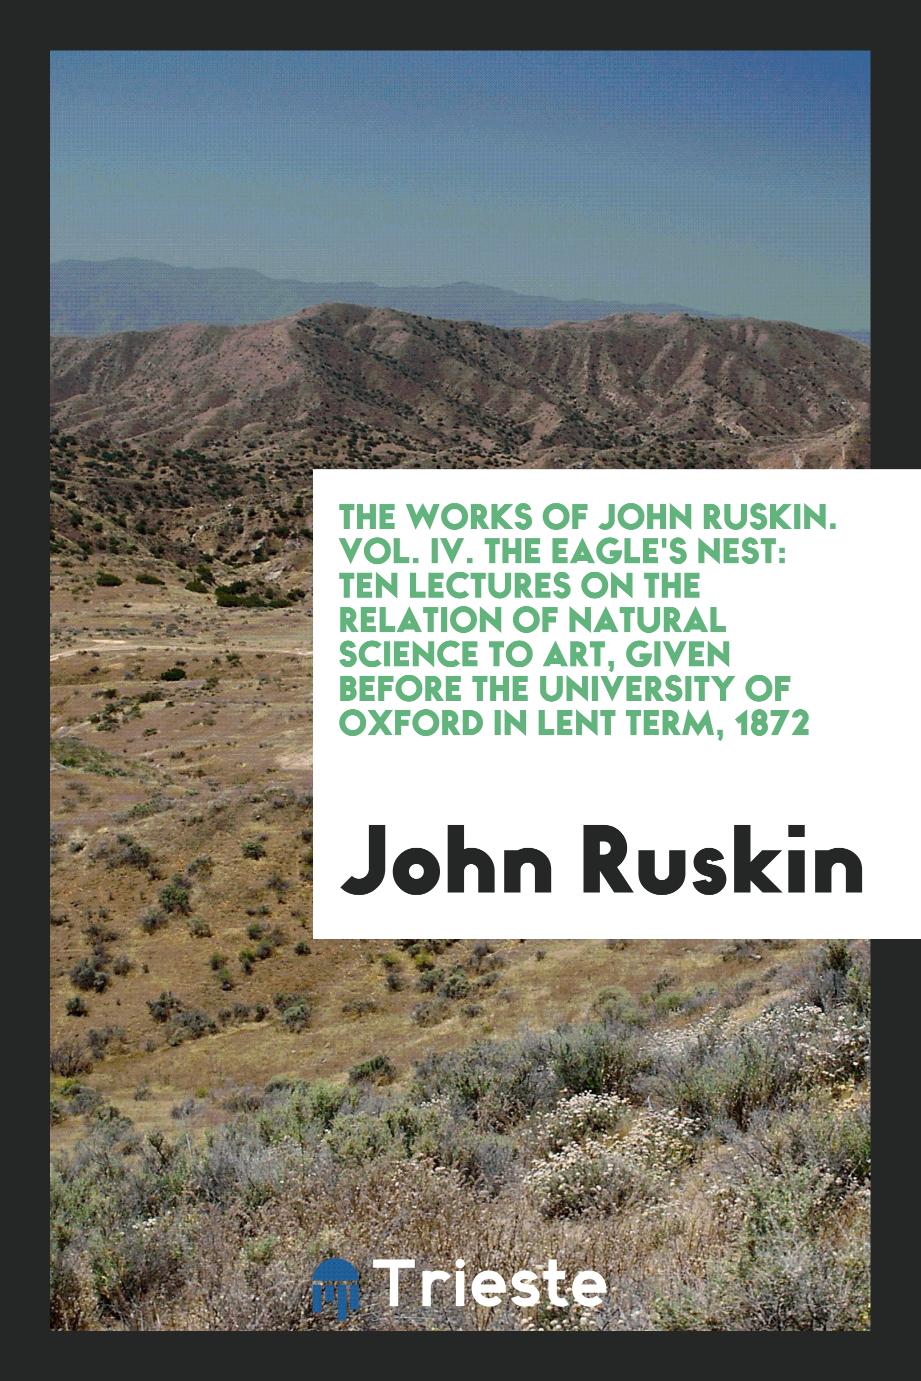 The Works of John Ruskin. Vol. IV. The Eagle's Nest: Ten Lectures on the Relation of Natural Science to Art, Given Before the University of Oxford in Lent Term, 1872